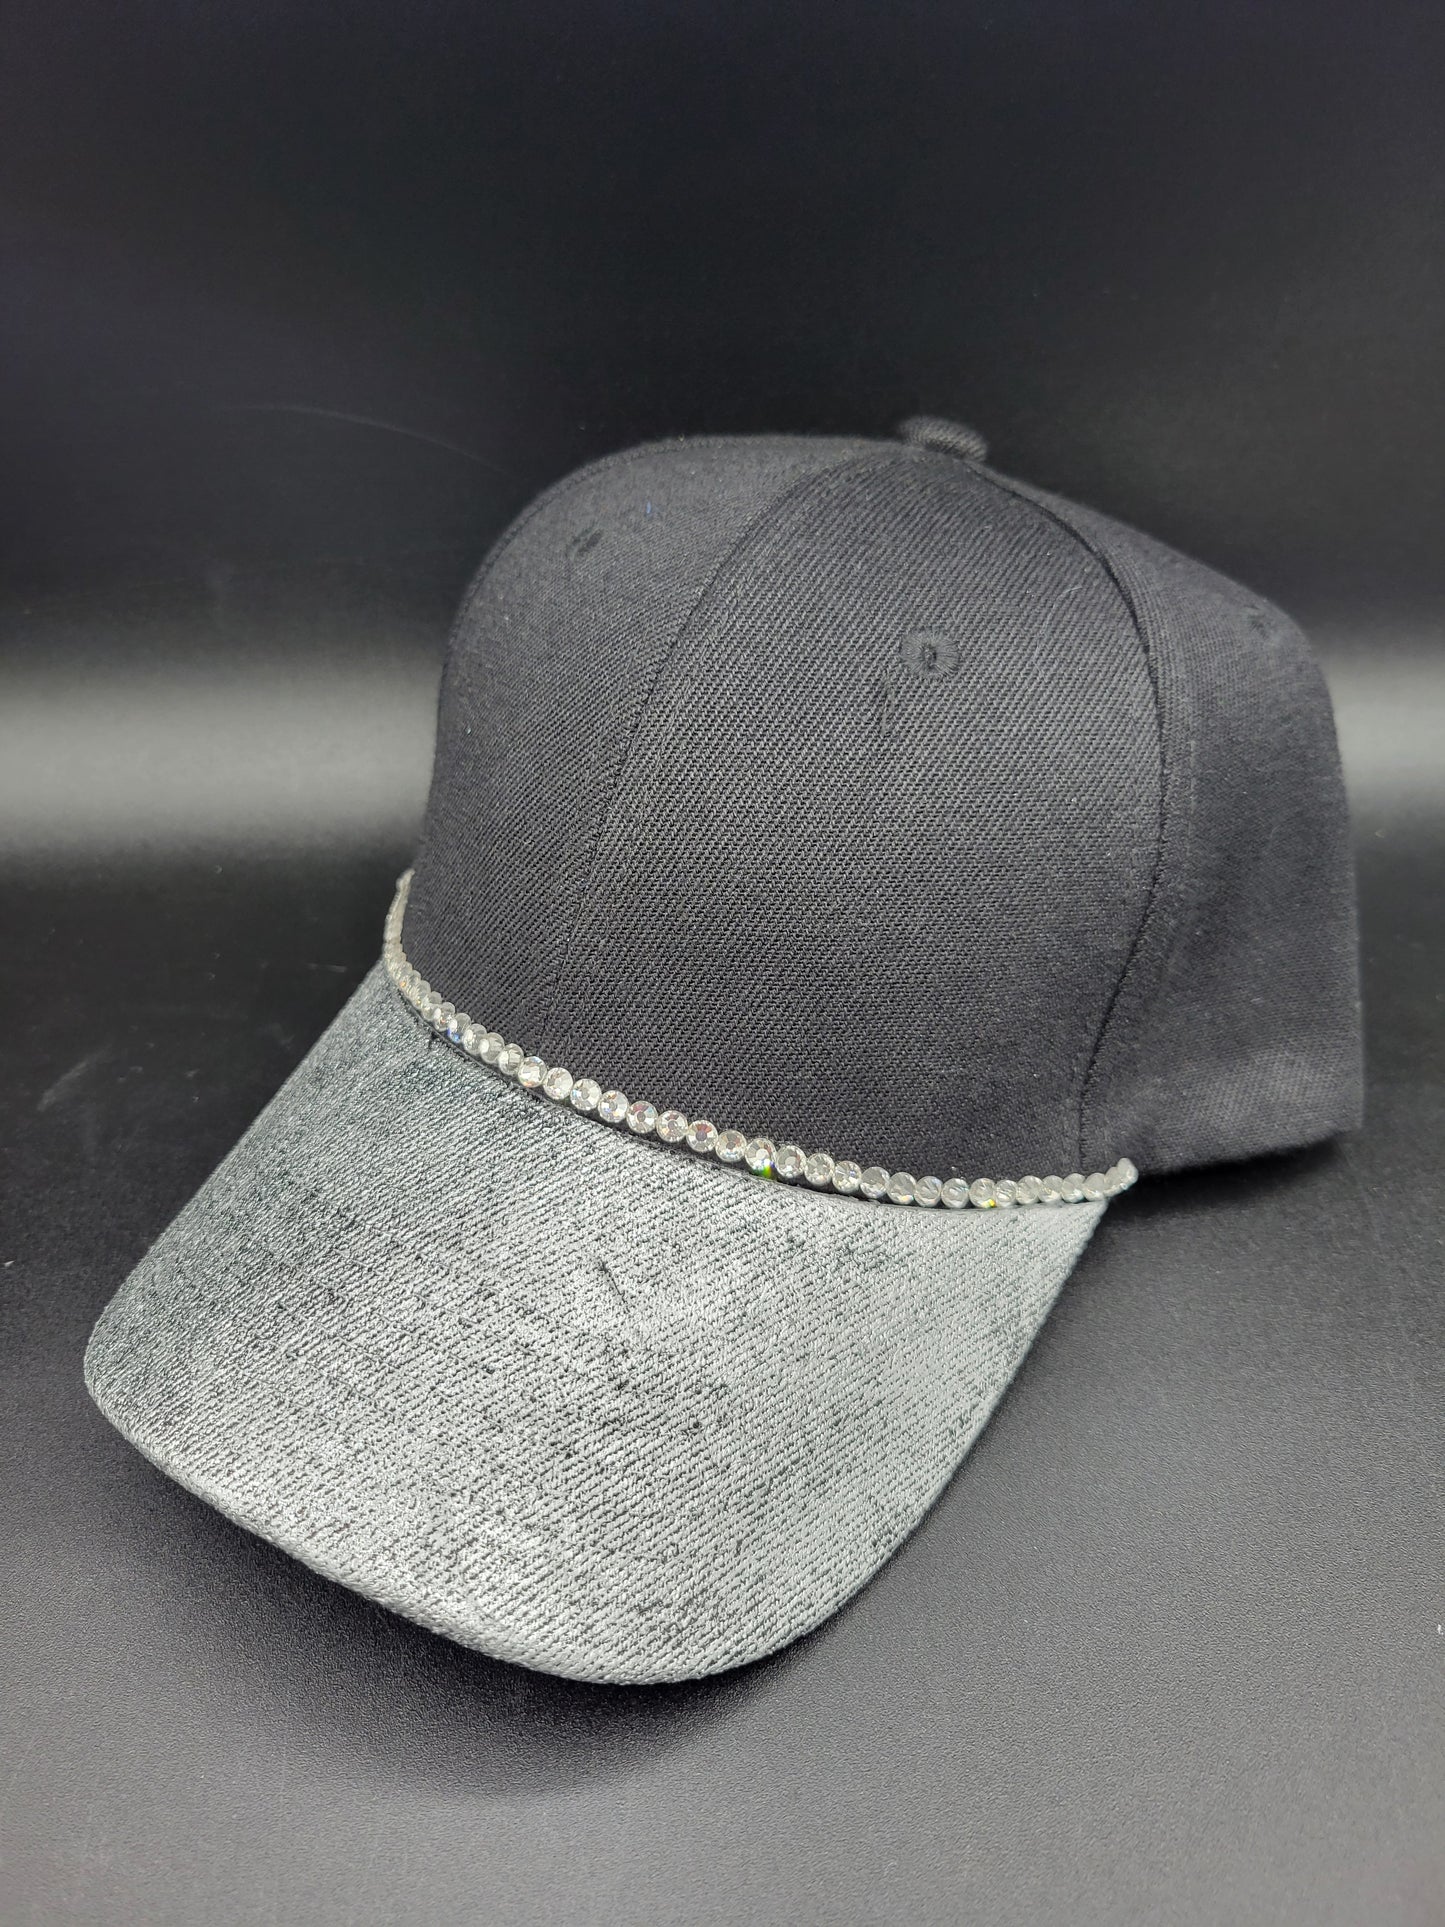 Black Dad cap with silver foil and silver rhinestones